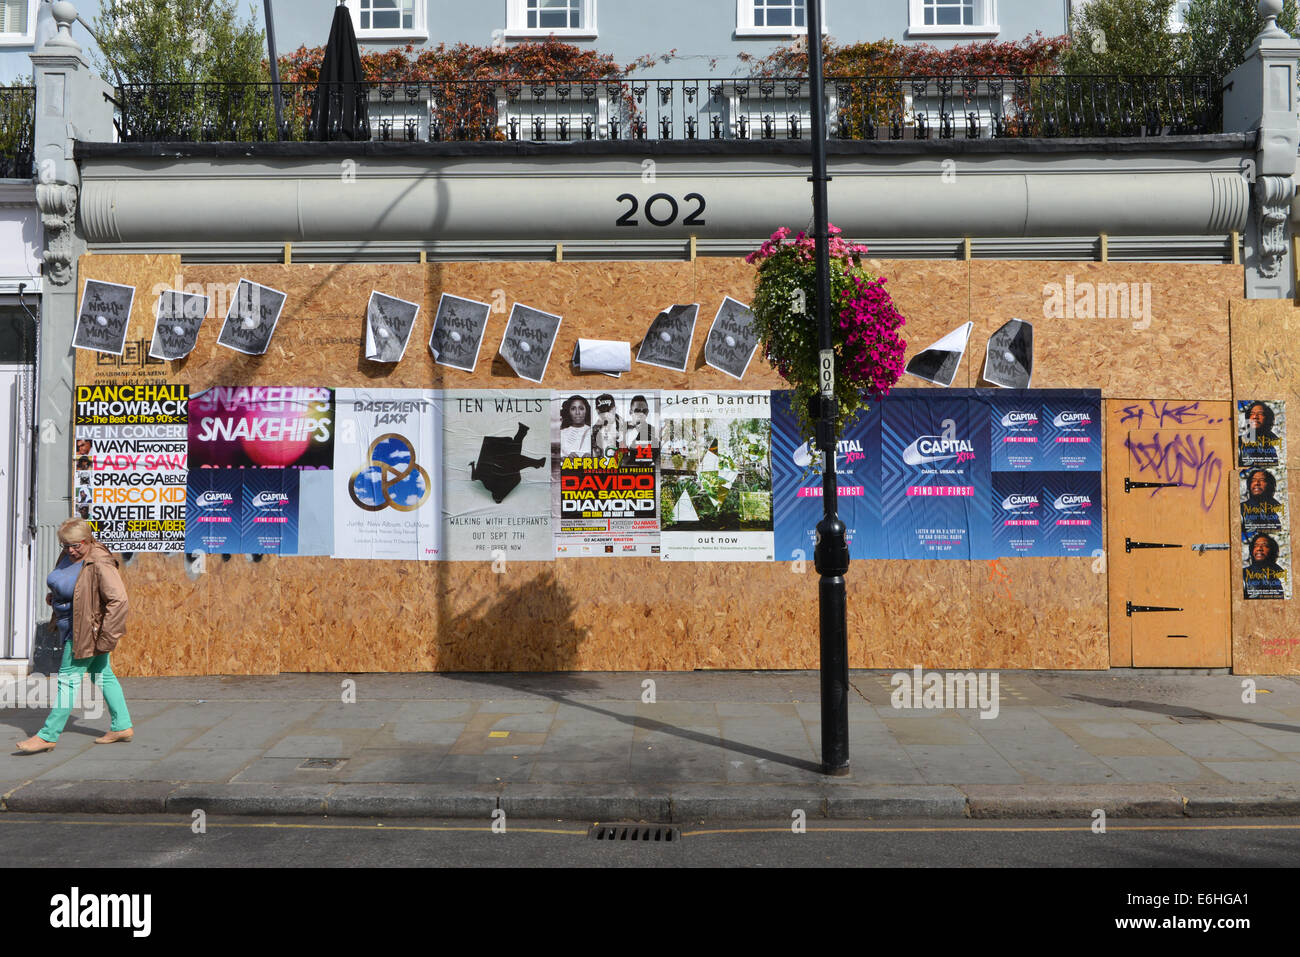 Westbourne Grove, Notting Hill, London, UK. 24th August 2014. Most commercial and private properties are boarded up along the route of the Notting Hill carnival against the potential for damage. Credit:  Matthew Chattle/Alamy Live News Stock Photo